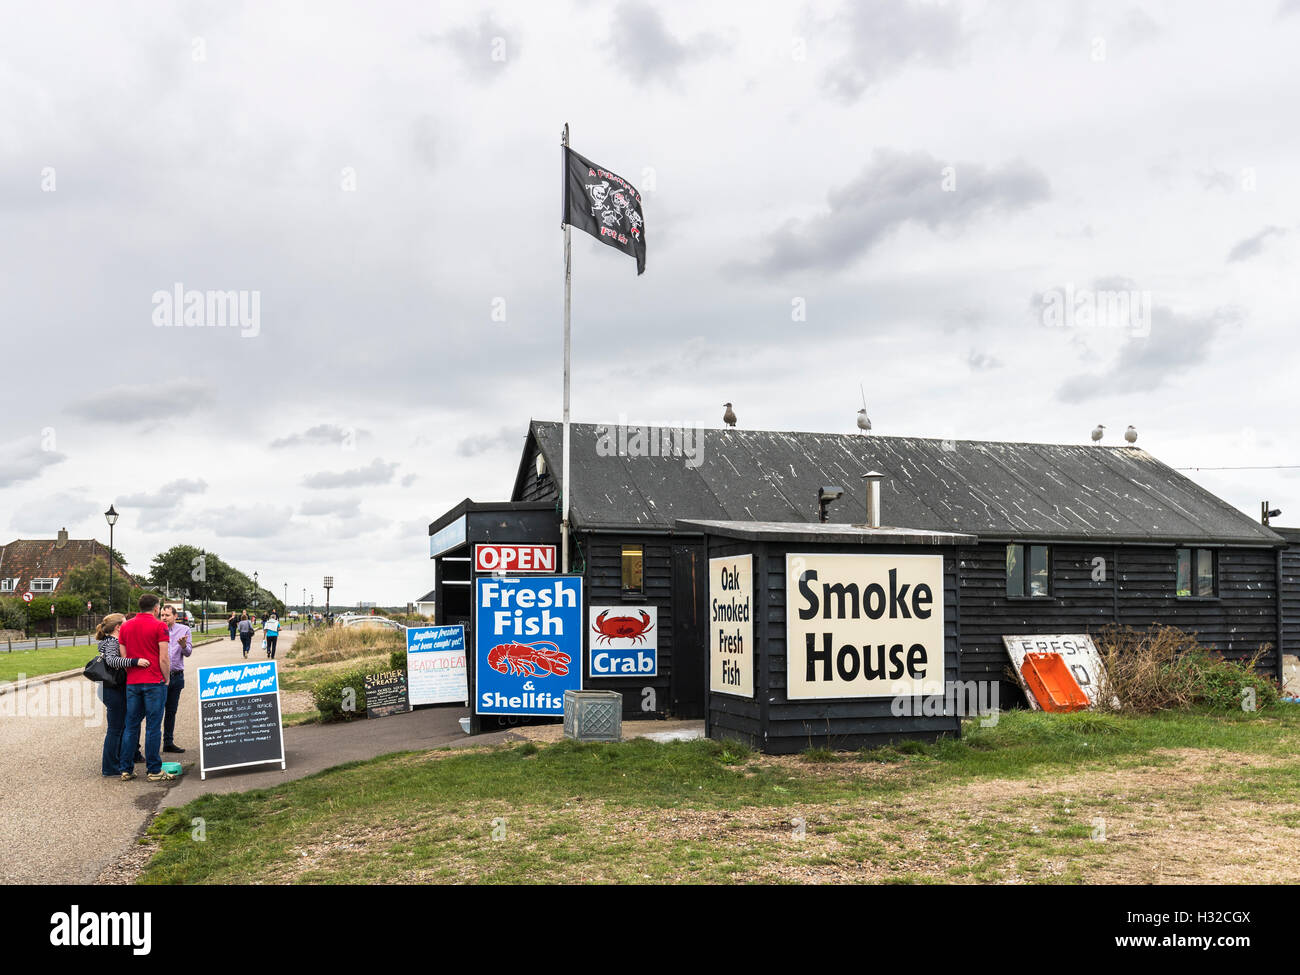 Black wooden eashore hut selling seafood, fresh boiled crab and lobster and smoke house, Aldeburgh on the Suffolk coast, East Anglia, eastern England Stock Photo